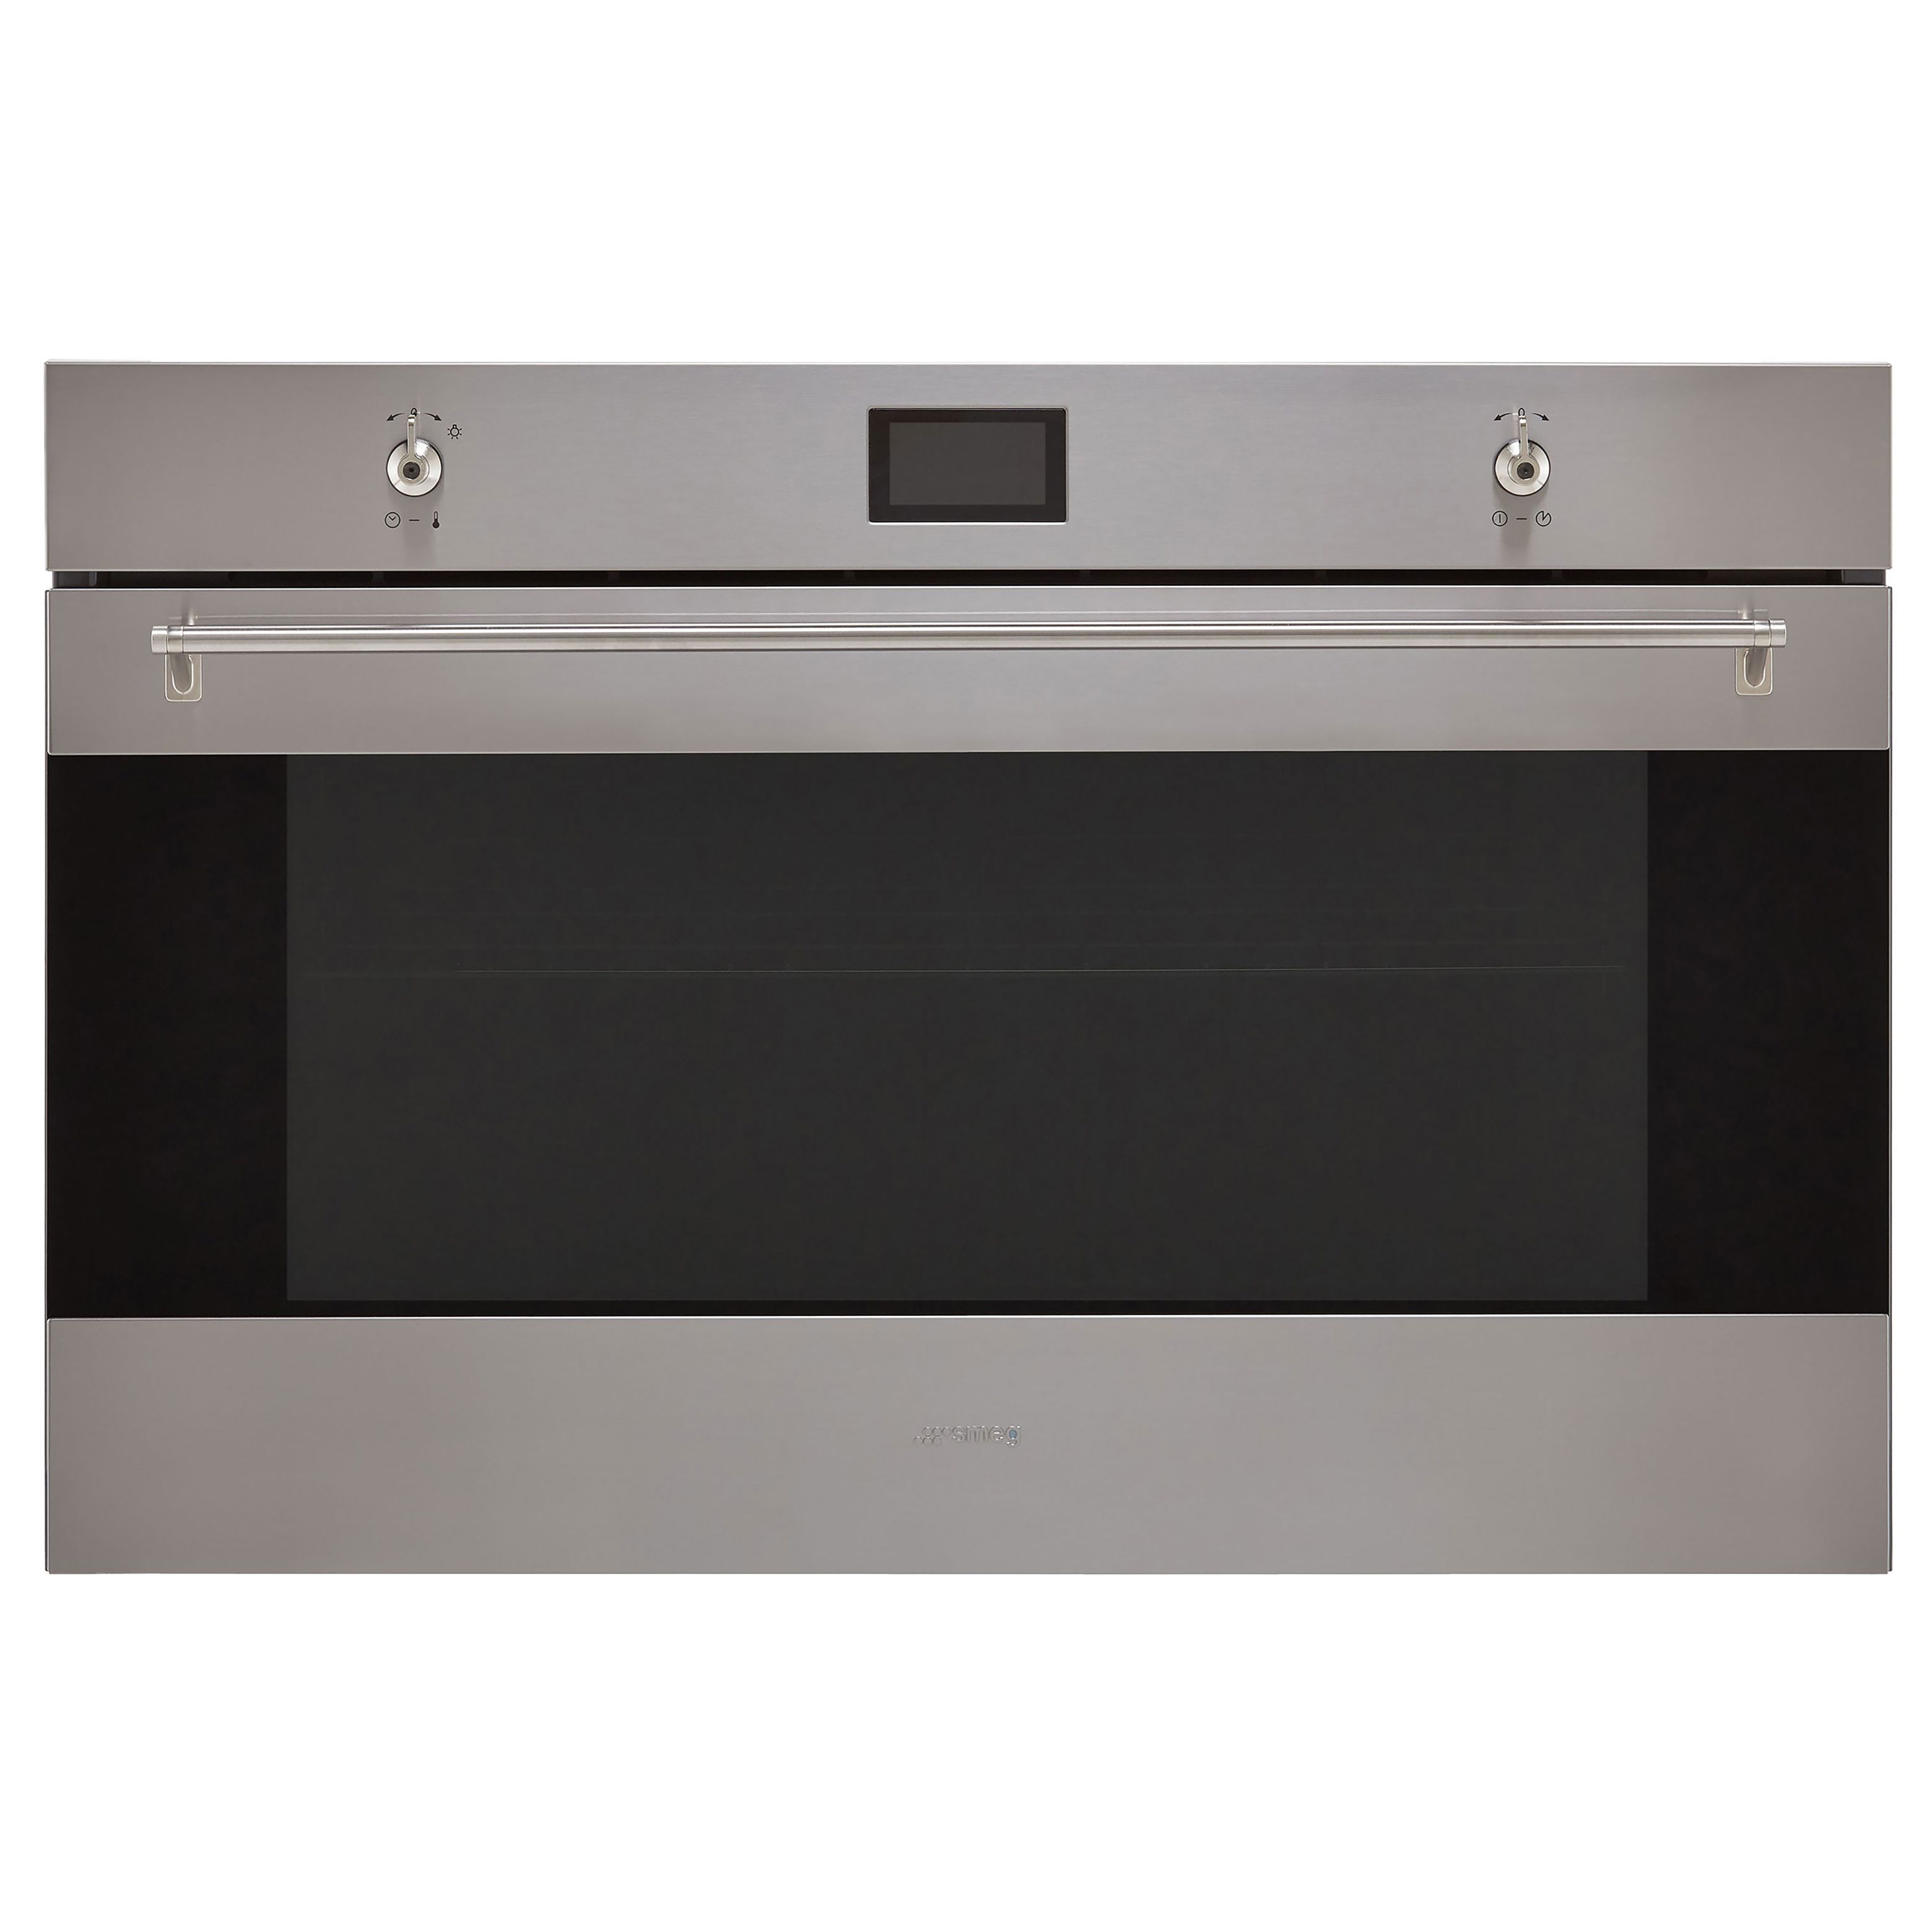 Smeg SF9390X1 Built-in Single Multifunction Oven - Stainless steel effect